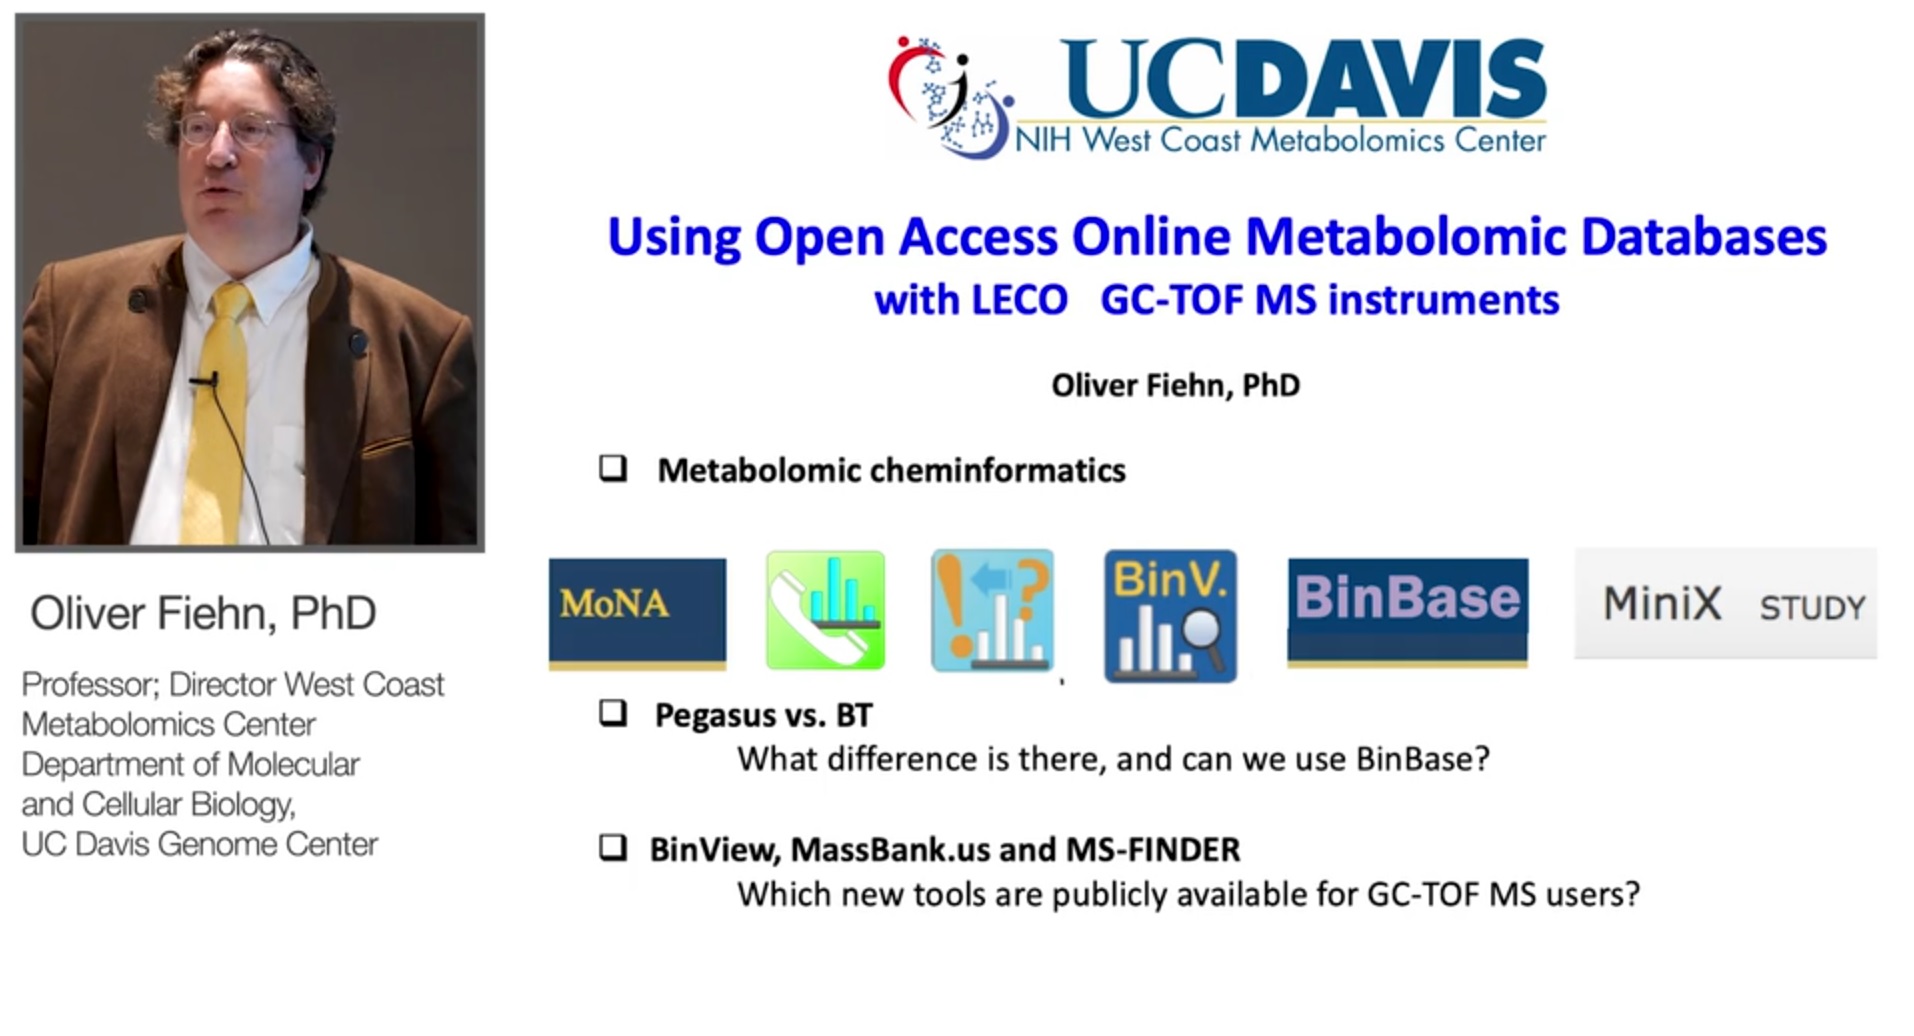 LECO/Oliver Fiehn: Using Open Access Online Metabolomic Databases with LECO GC-TOF MS instruments